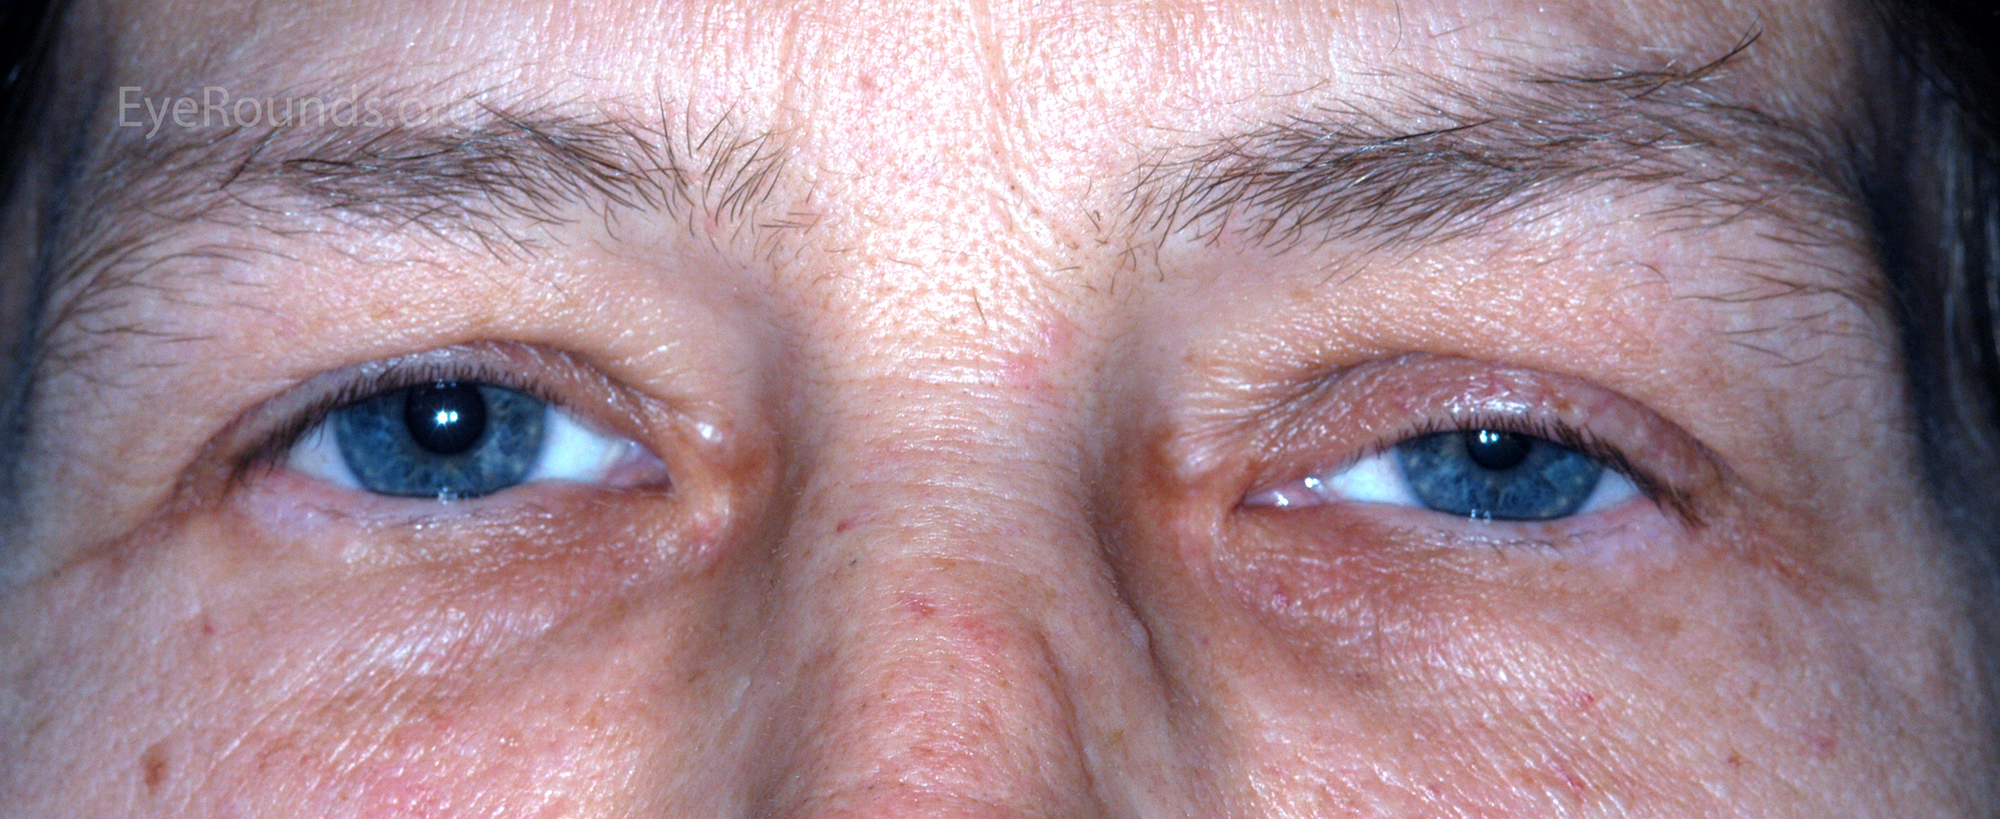 mild ptosis and miosis of the left eye 